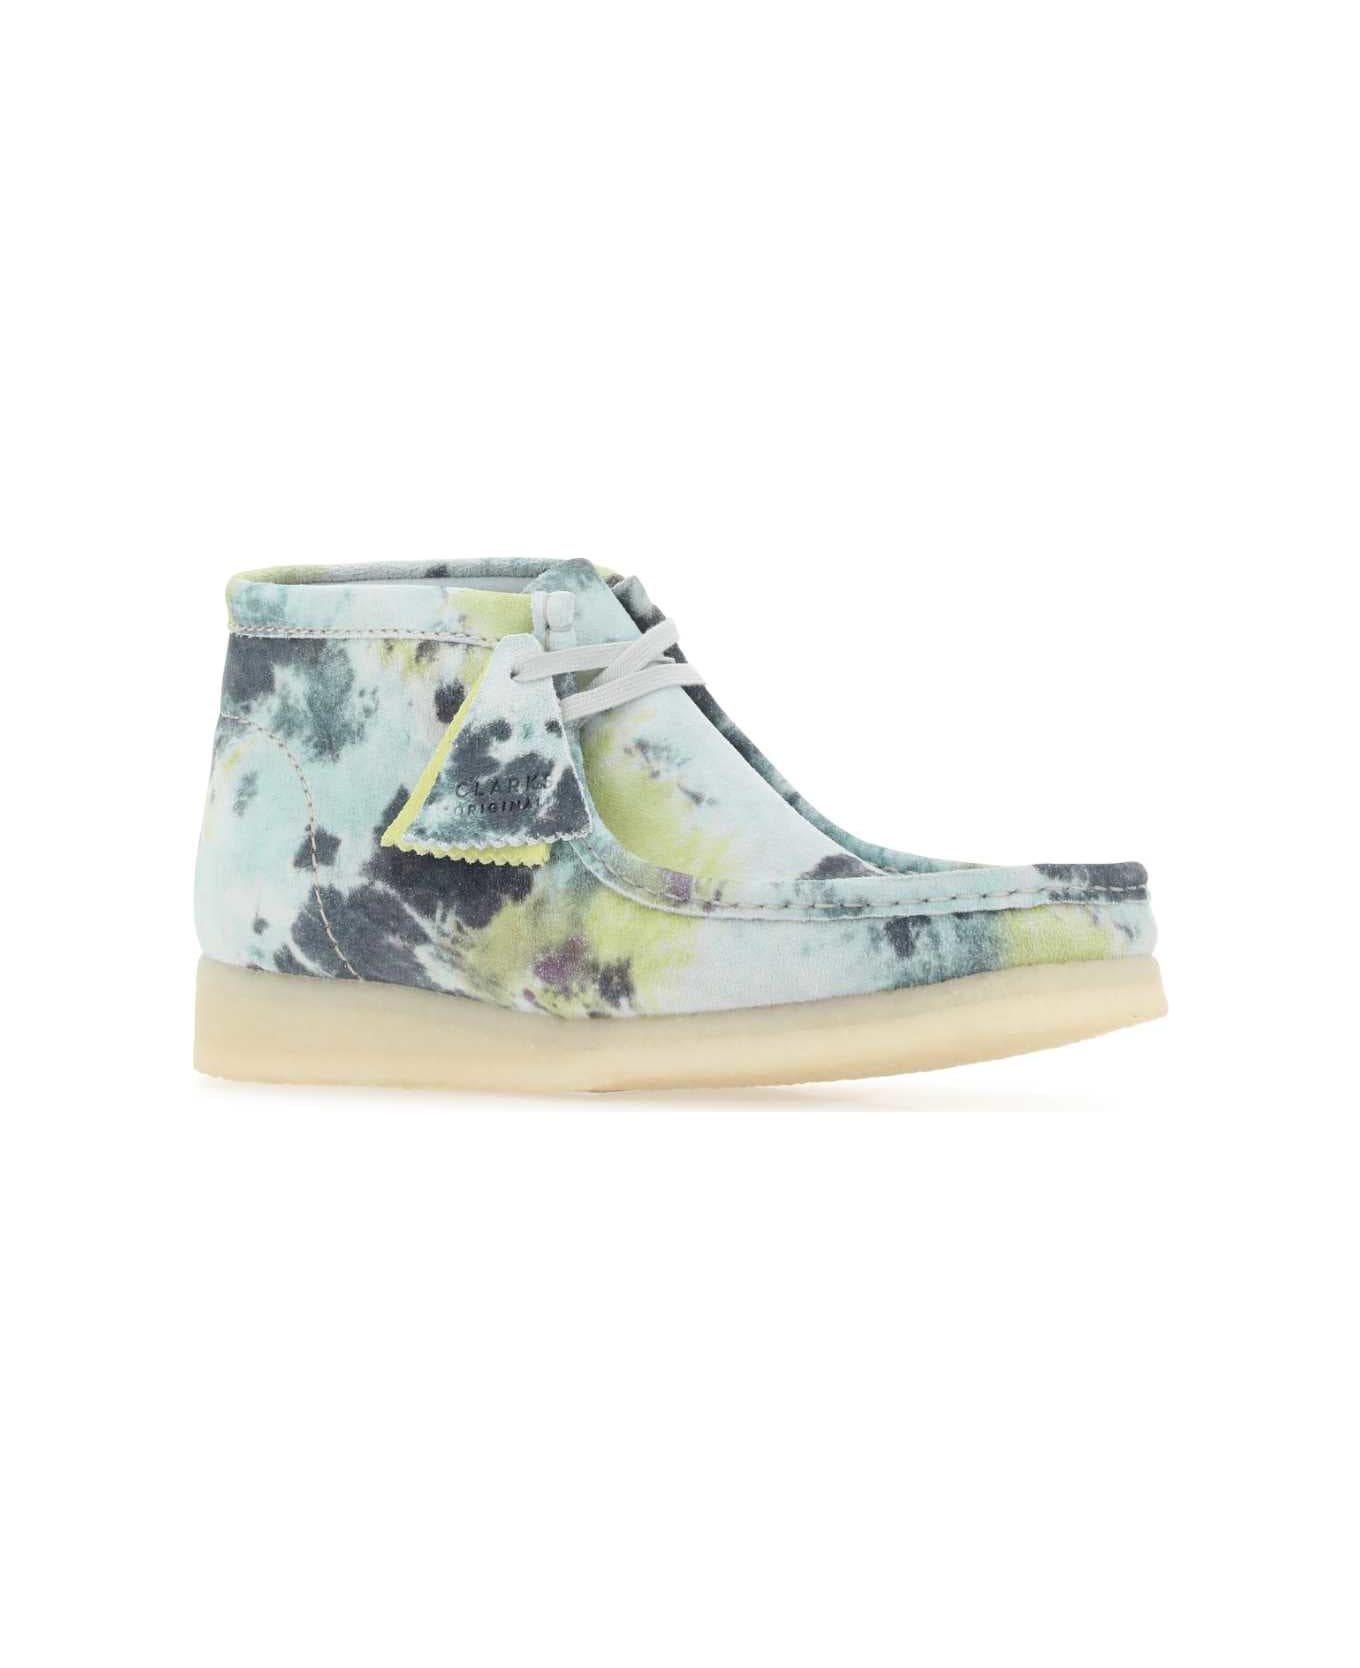 Clarks Printed Suede Wallabee Ankle Boots - MTURQUOISE